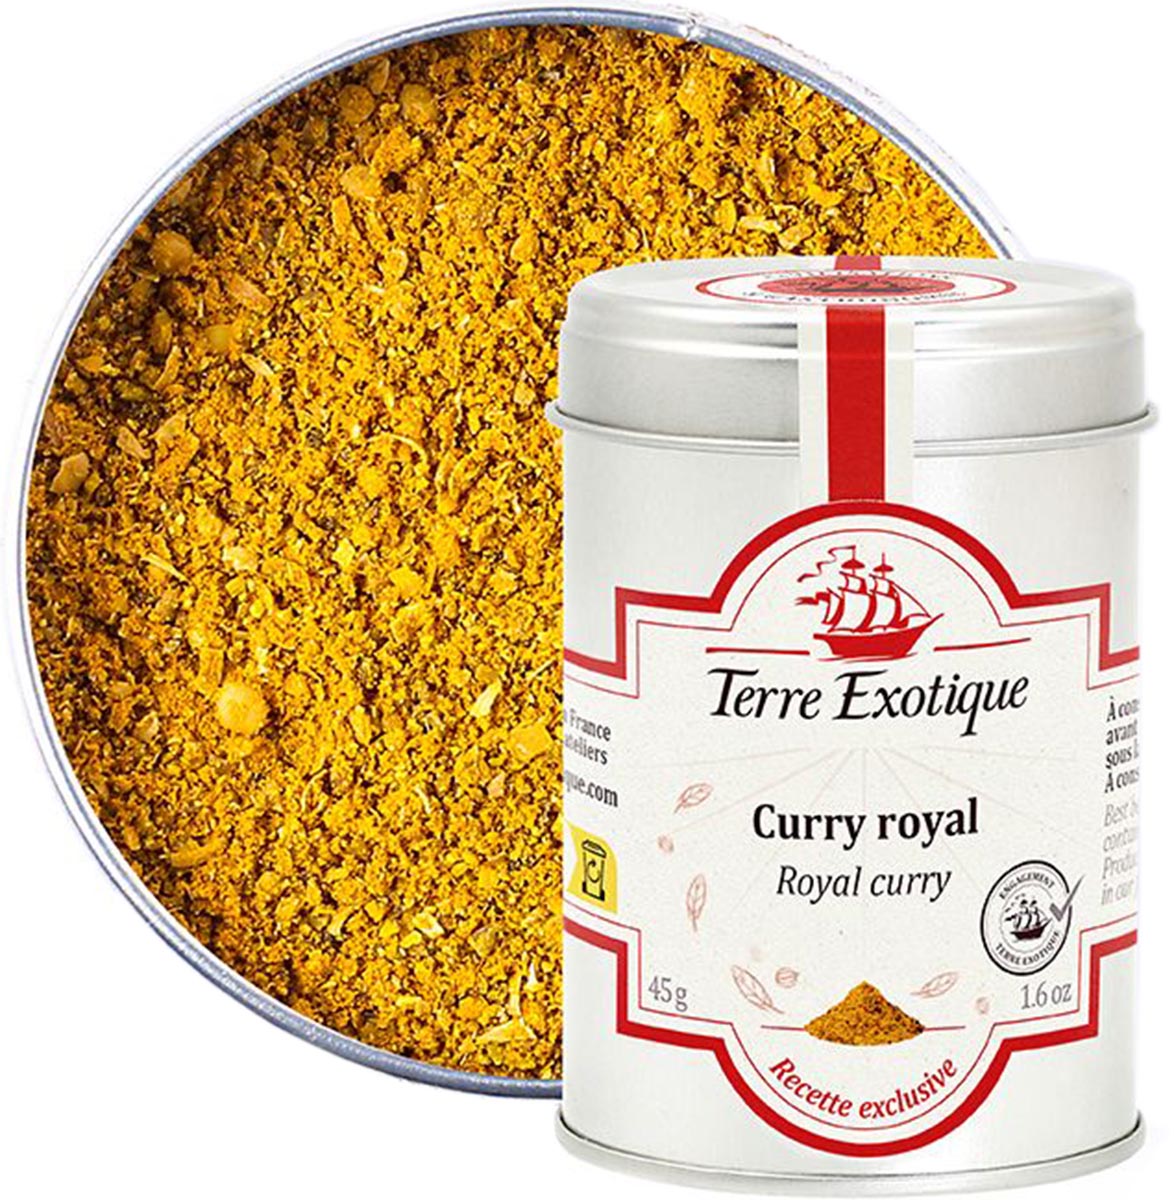 Terre Exotique Curry Royal